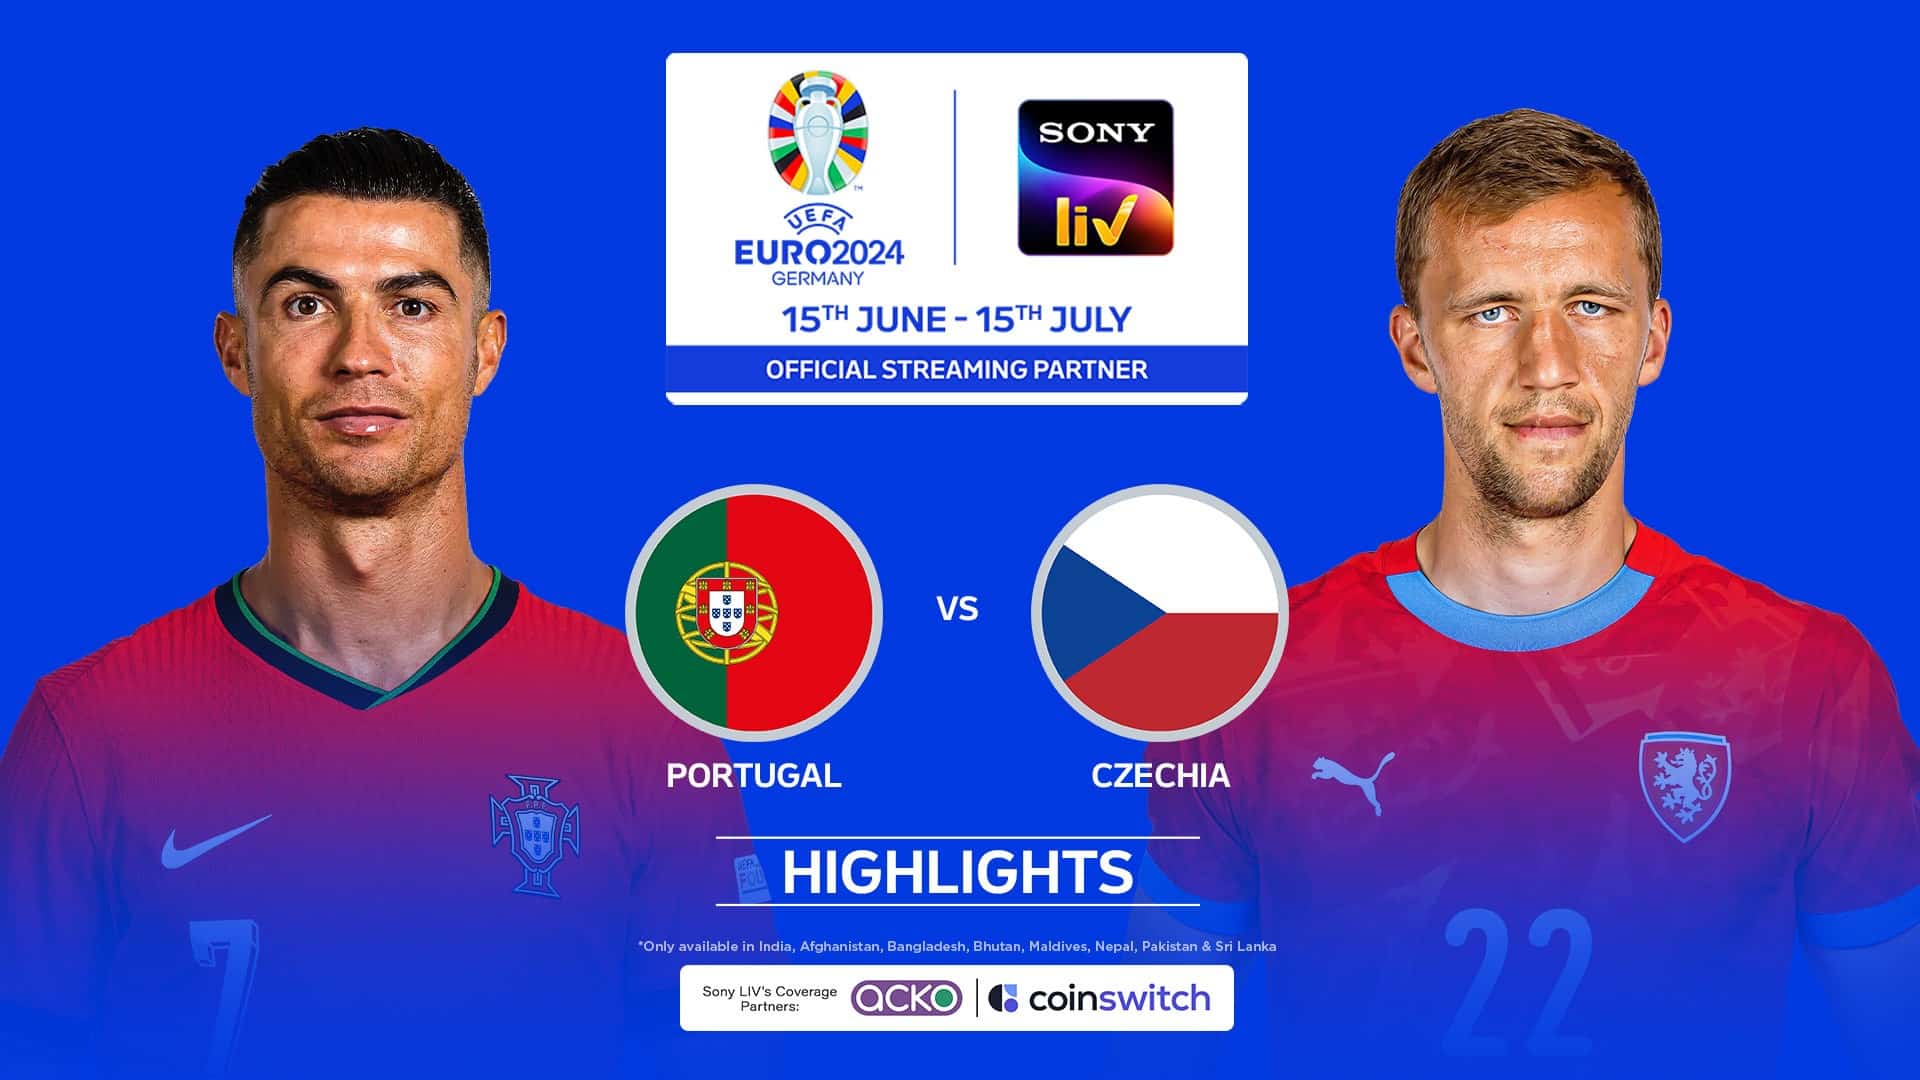 https://www.mobilemasala.com/sports/UEFA-European-Championship-2024-Cristiano-Ronaldo-led-Portugal-will-face-Czech-Republic-when-and-where-to-watch-the-match-i273514